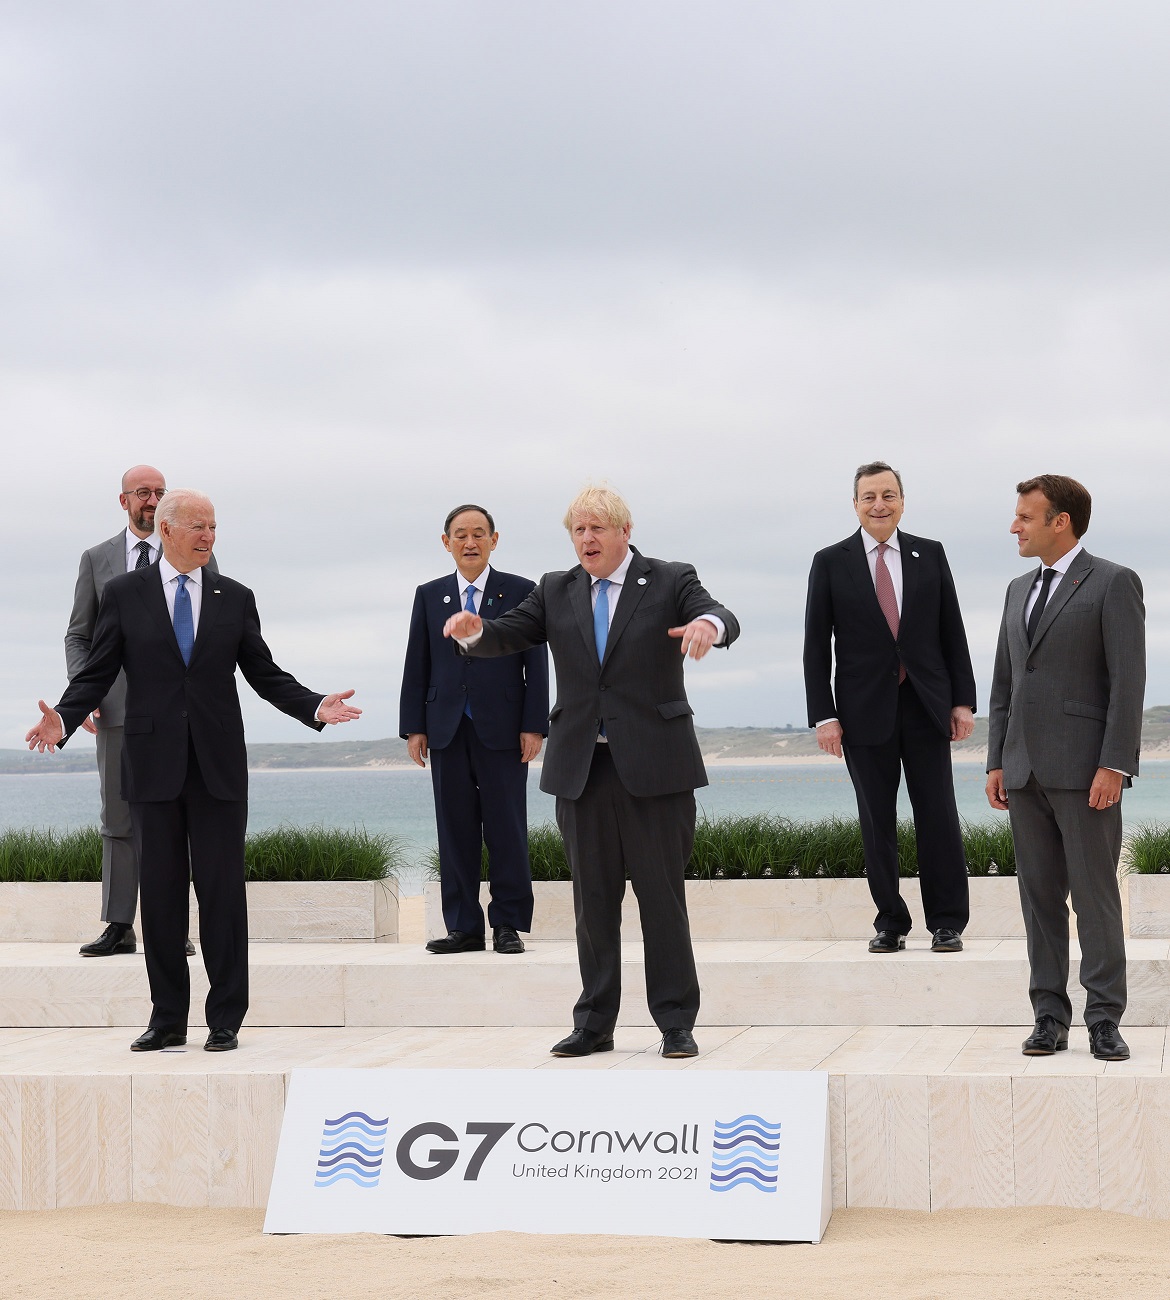 Ｇ７首脳との集合写真撮影３